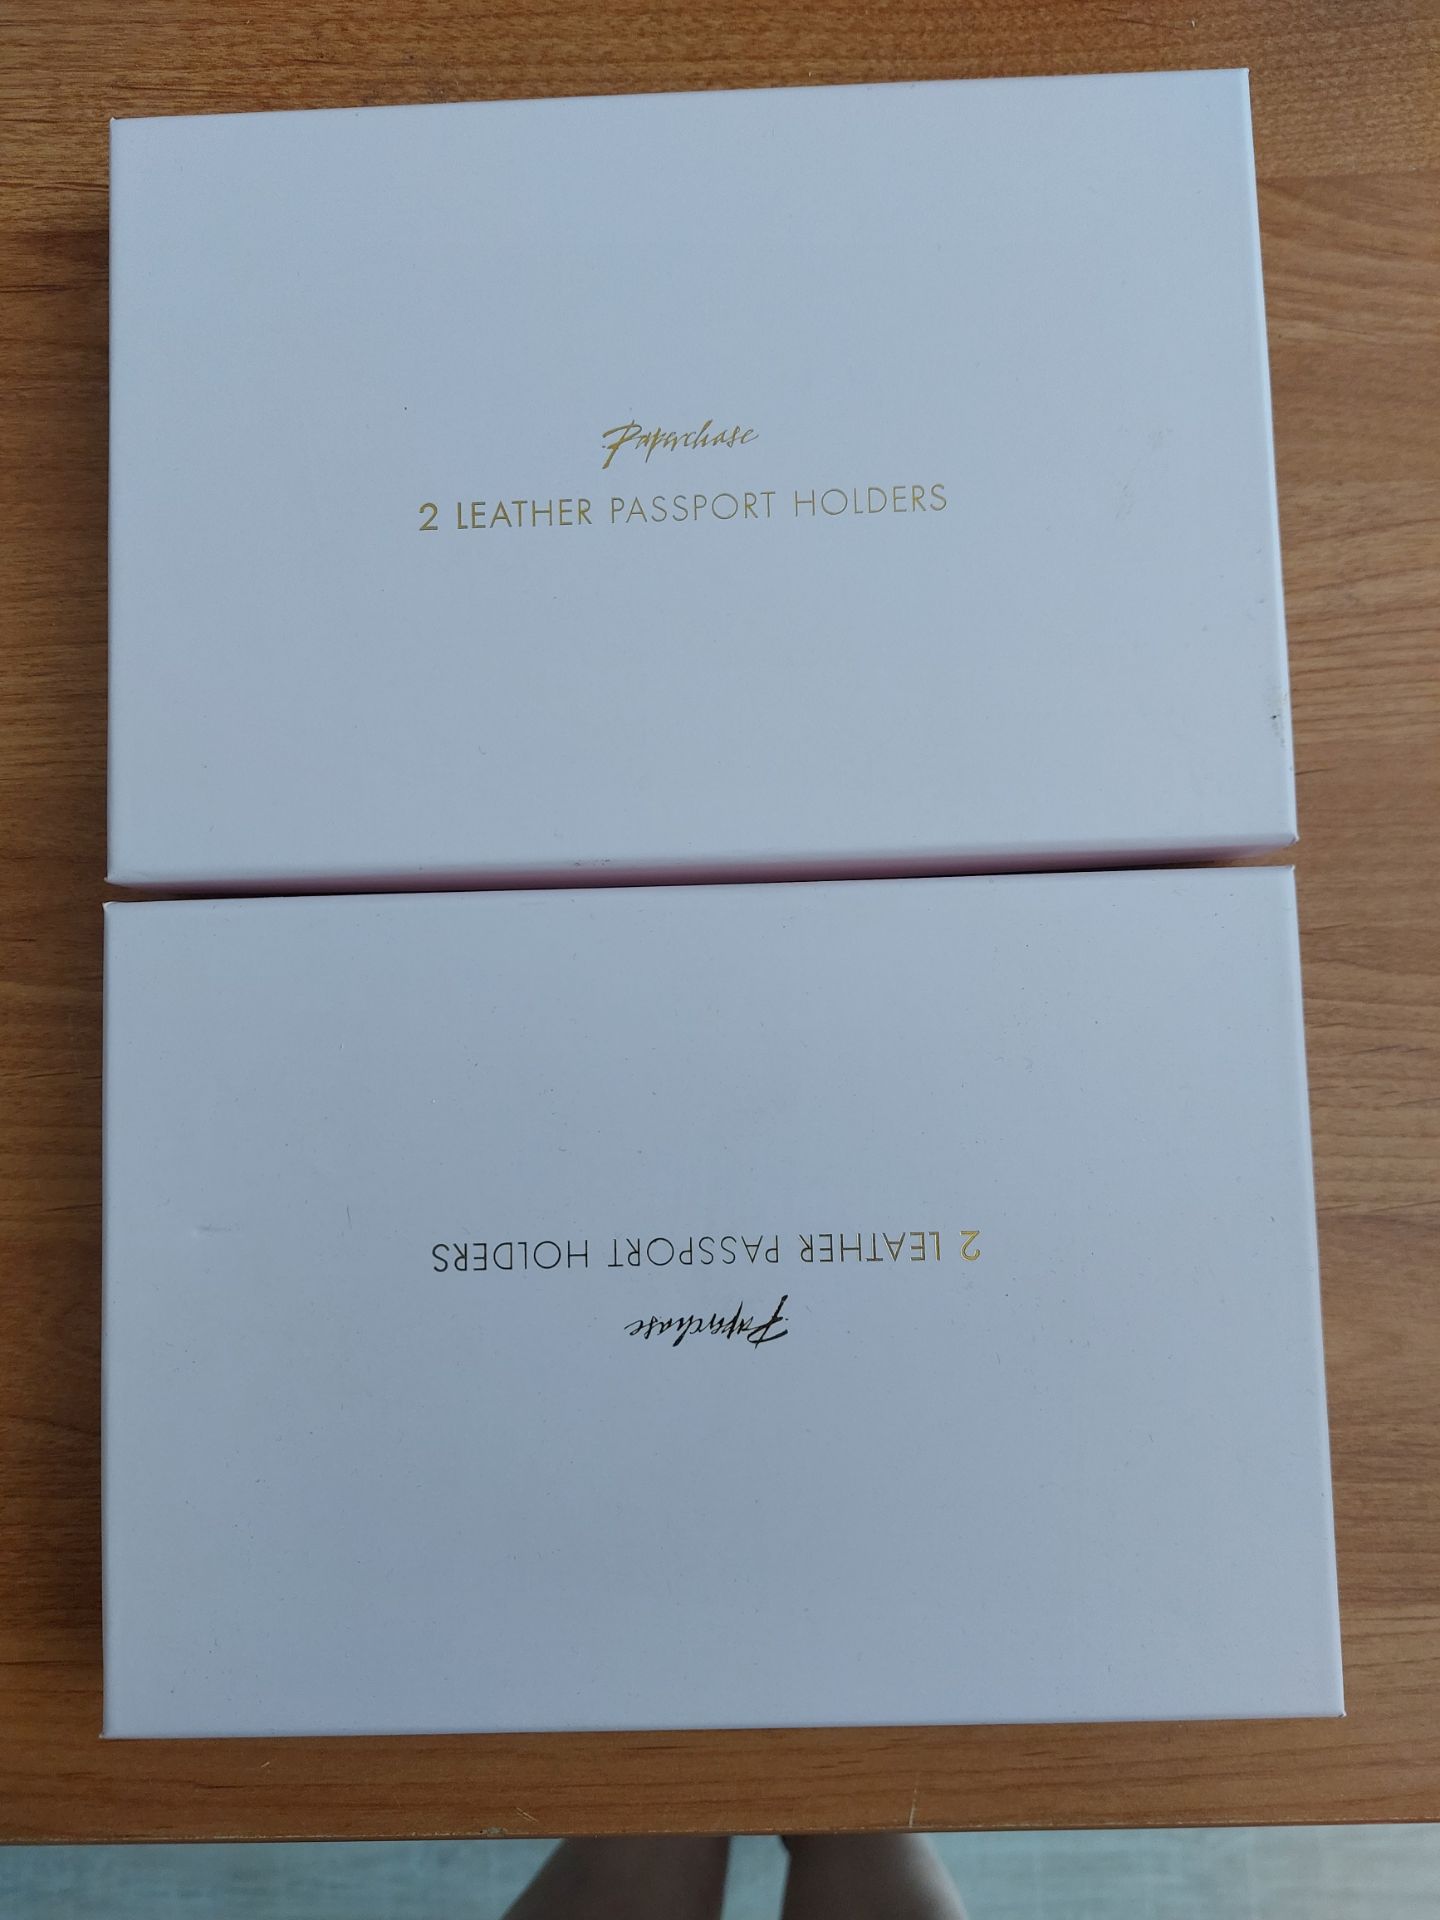 Wedding Passport Covers, 2 Sets of 2 - Image 7 of 7